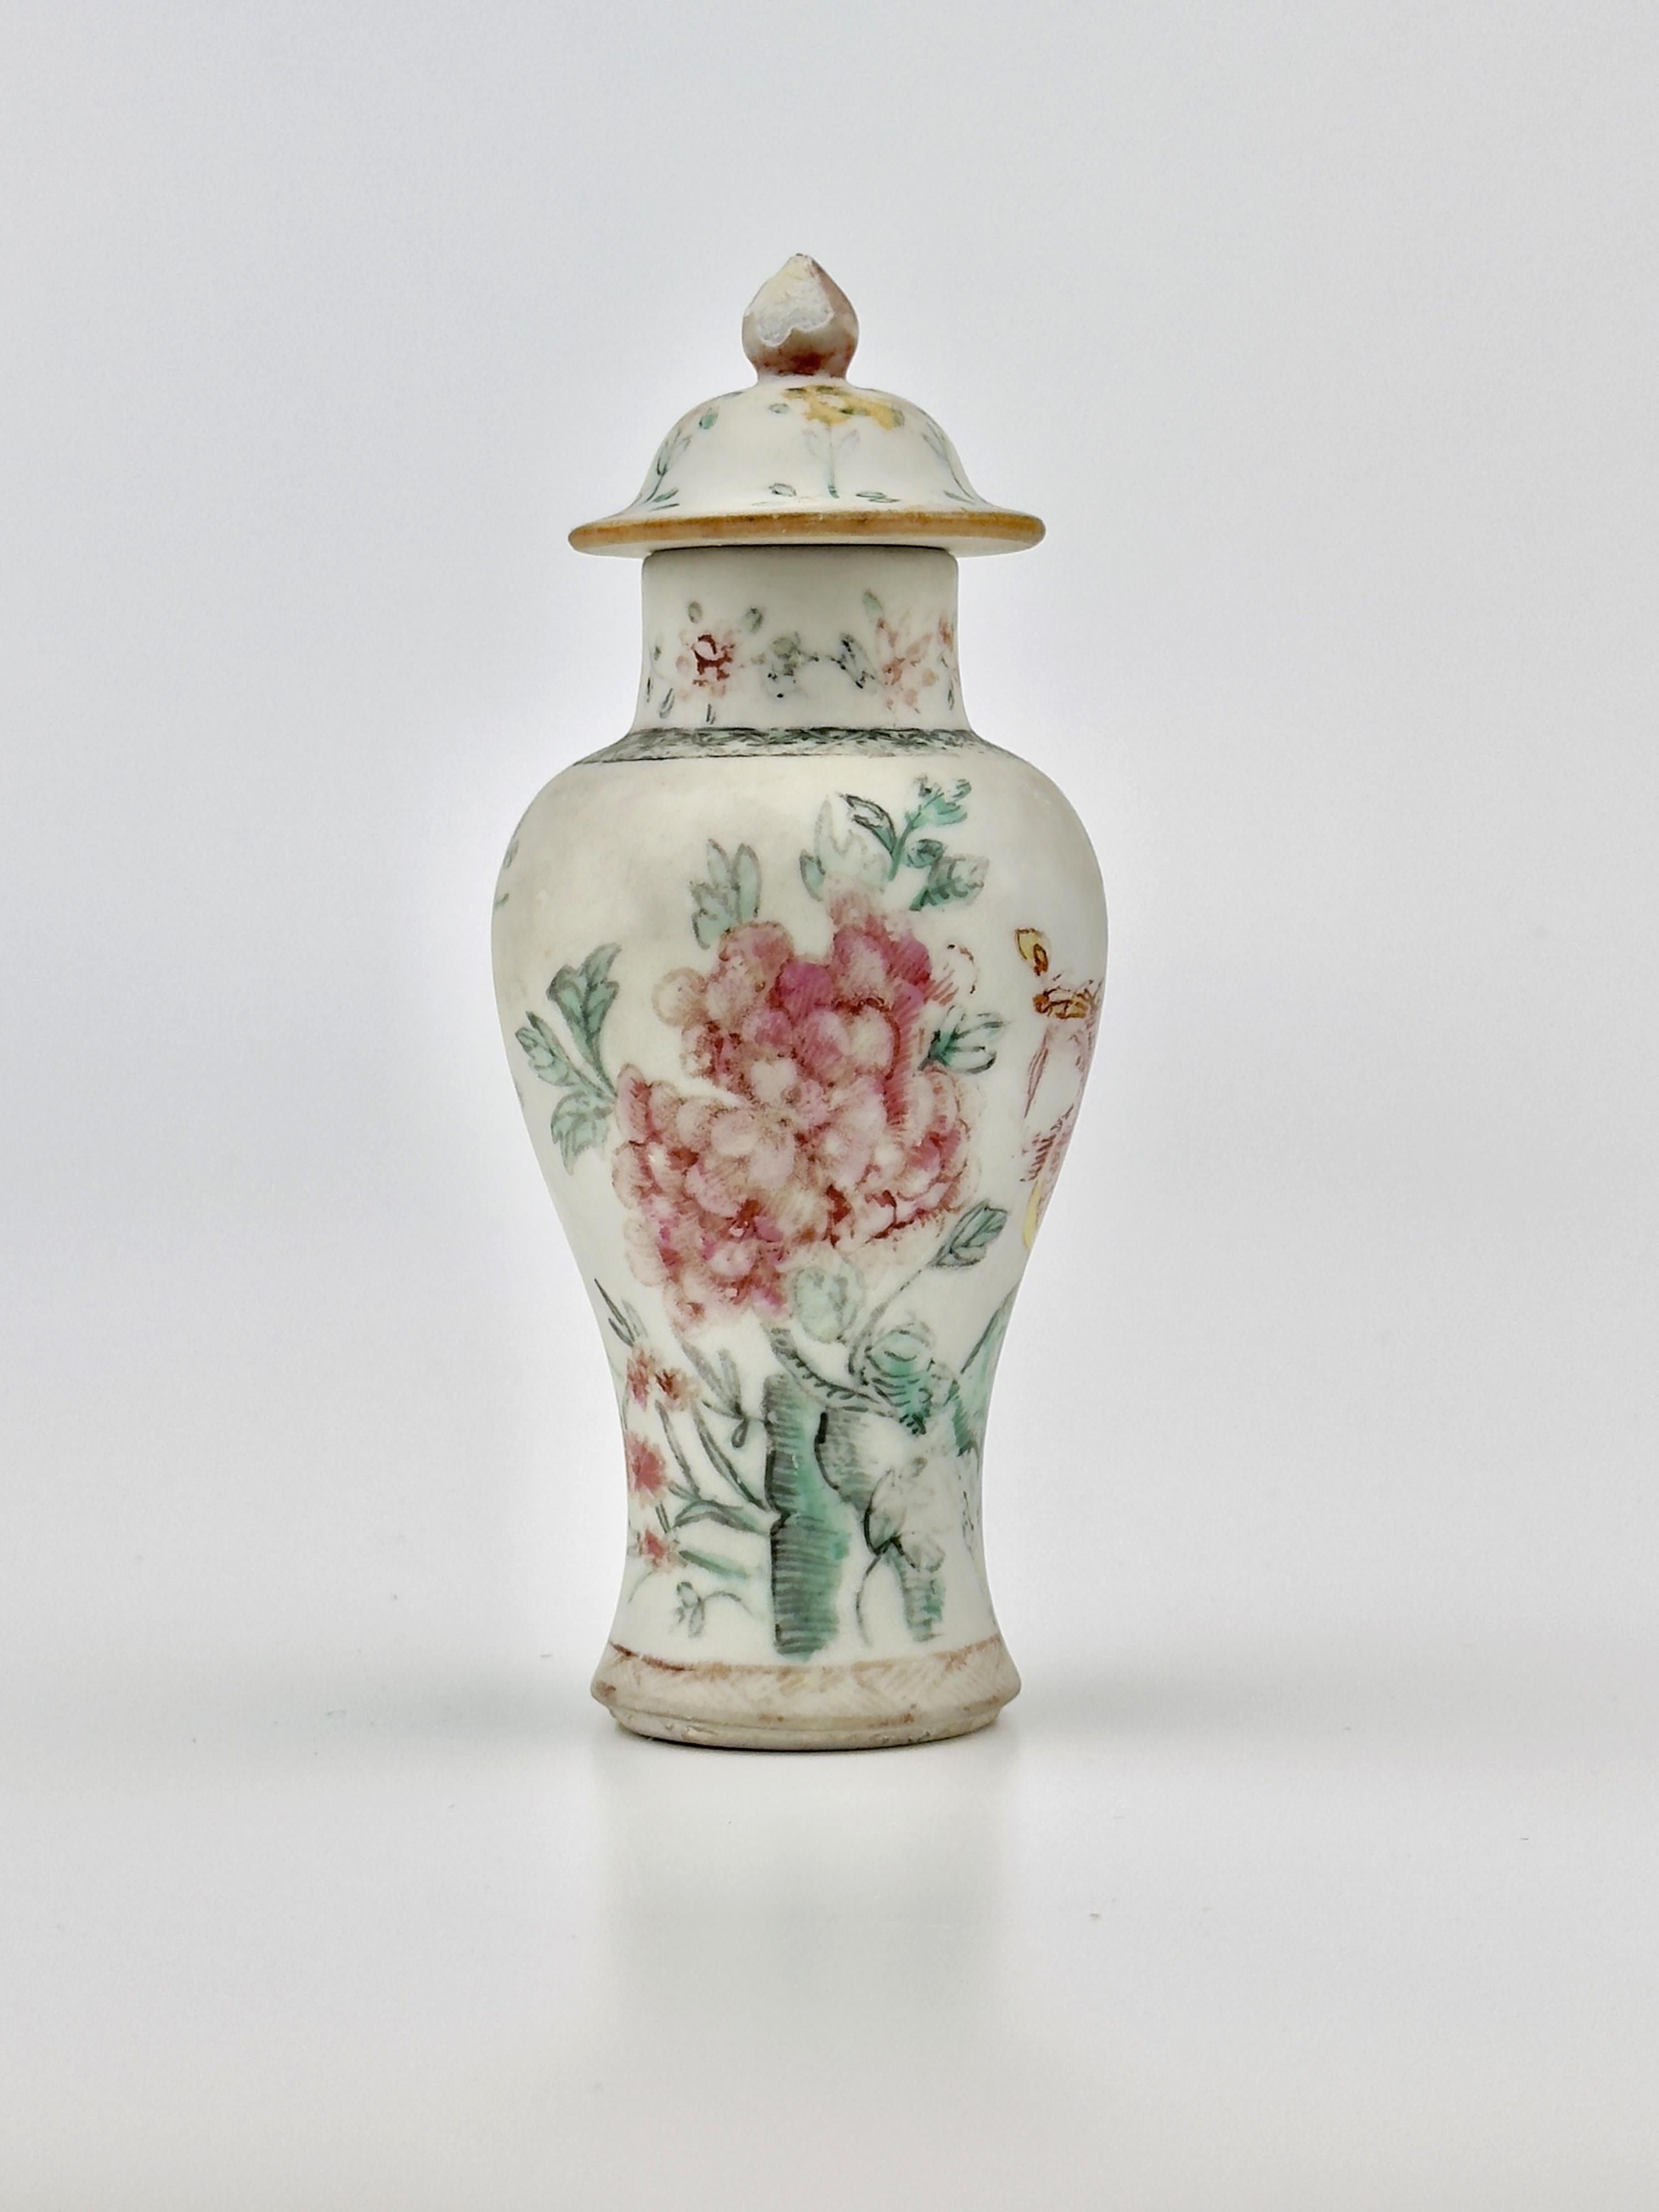 The famille rose enamels allowed for a greater expression of detail, seen here in the fine rendering of petals and feathers. The vase's form is elegant, with a tapered body and domed lid, crowned with a delicate finial, embodying the sophistication